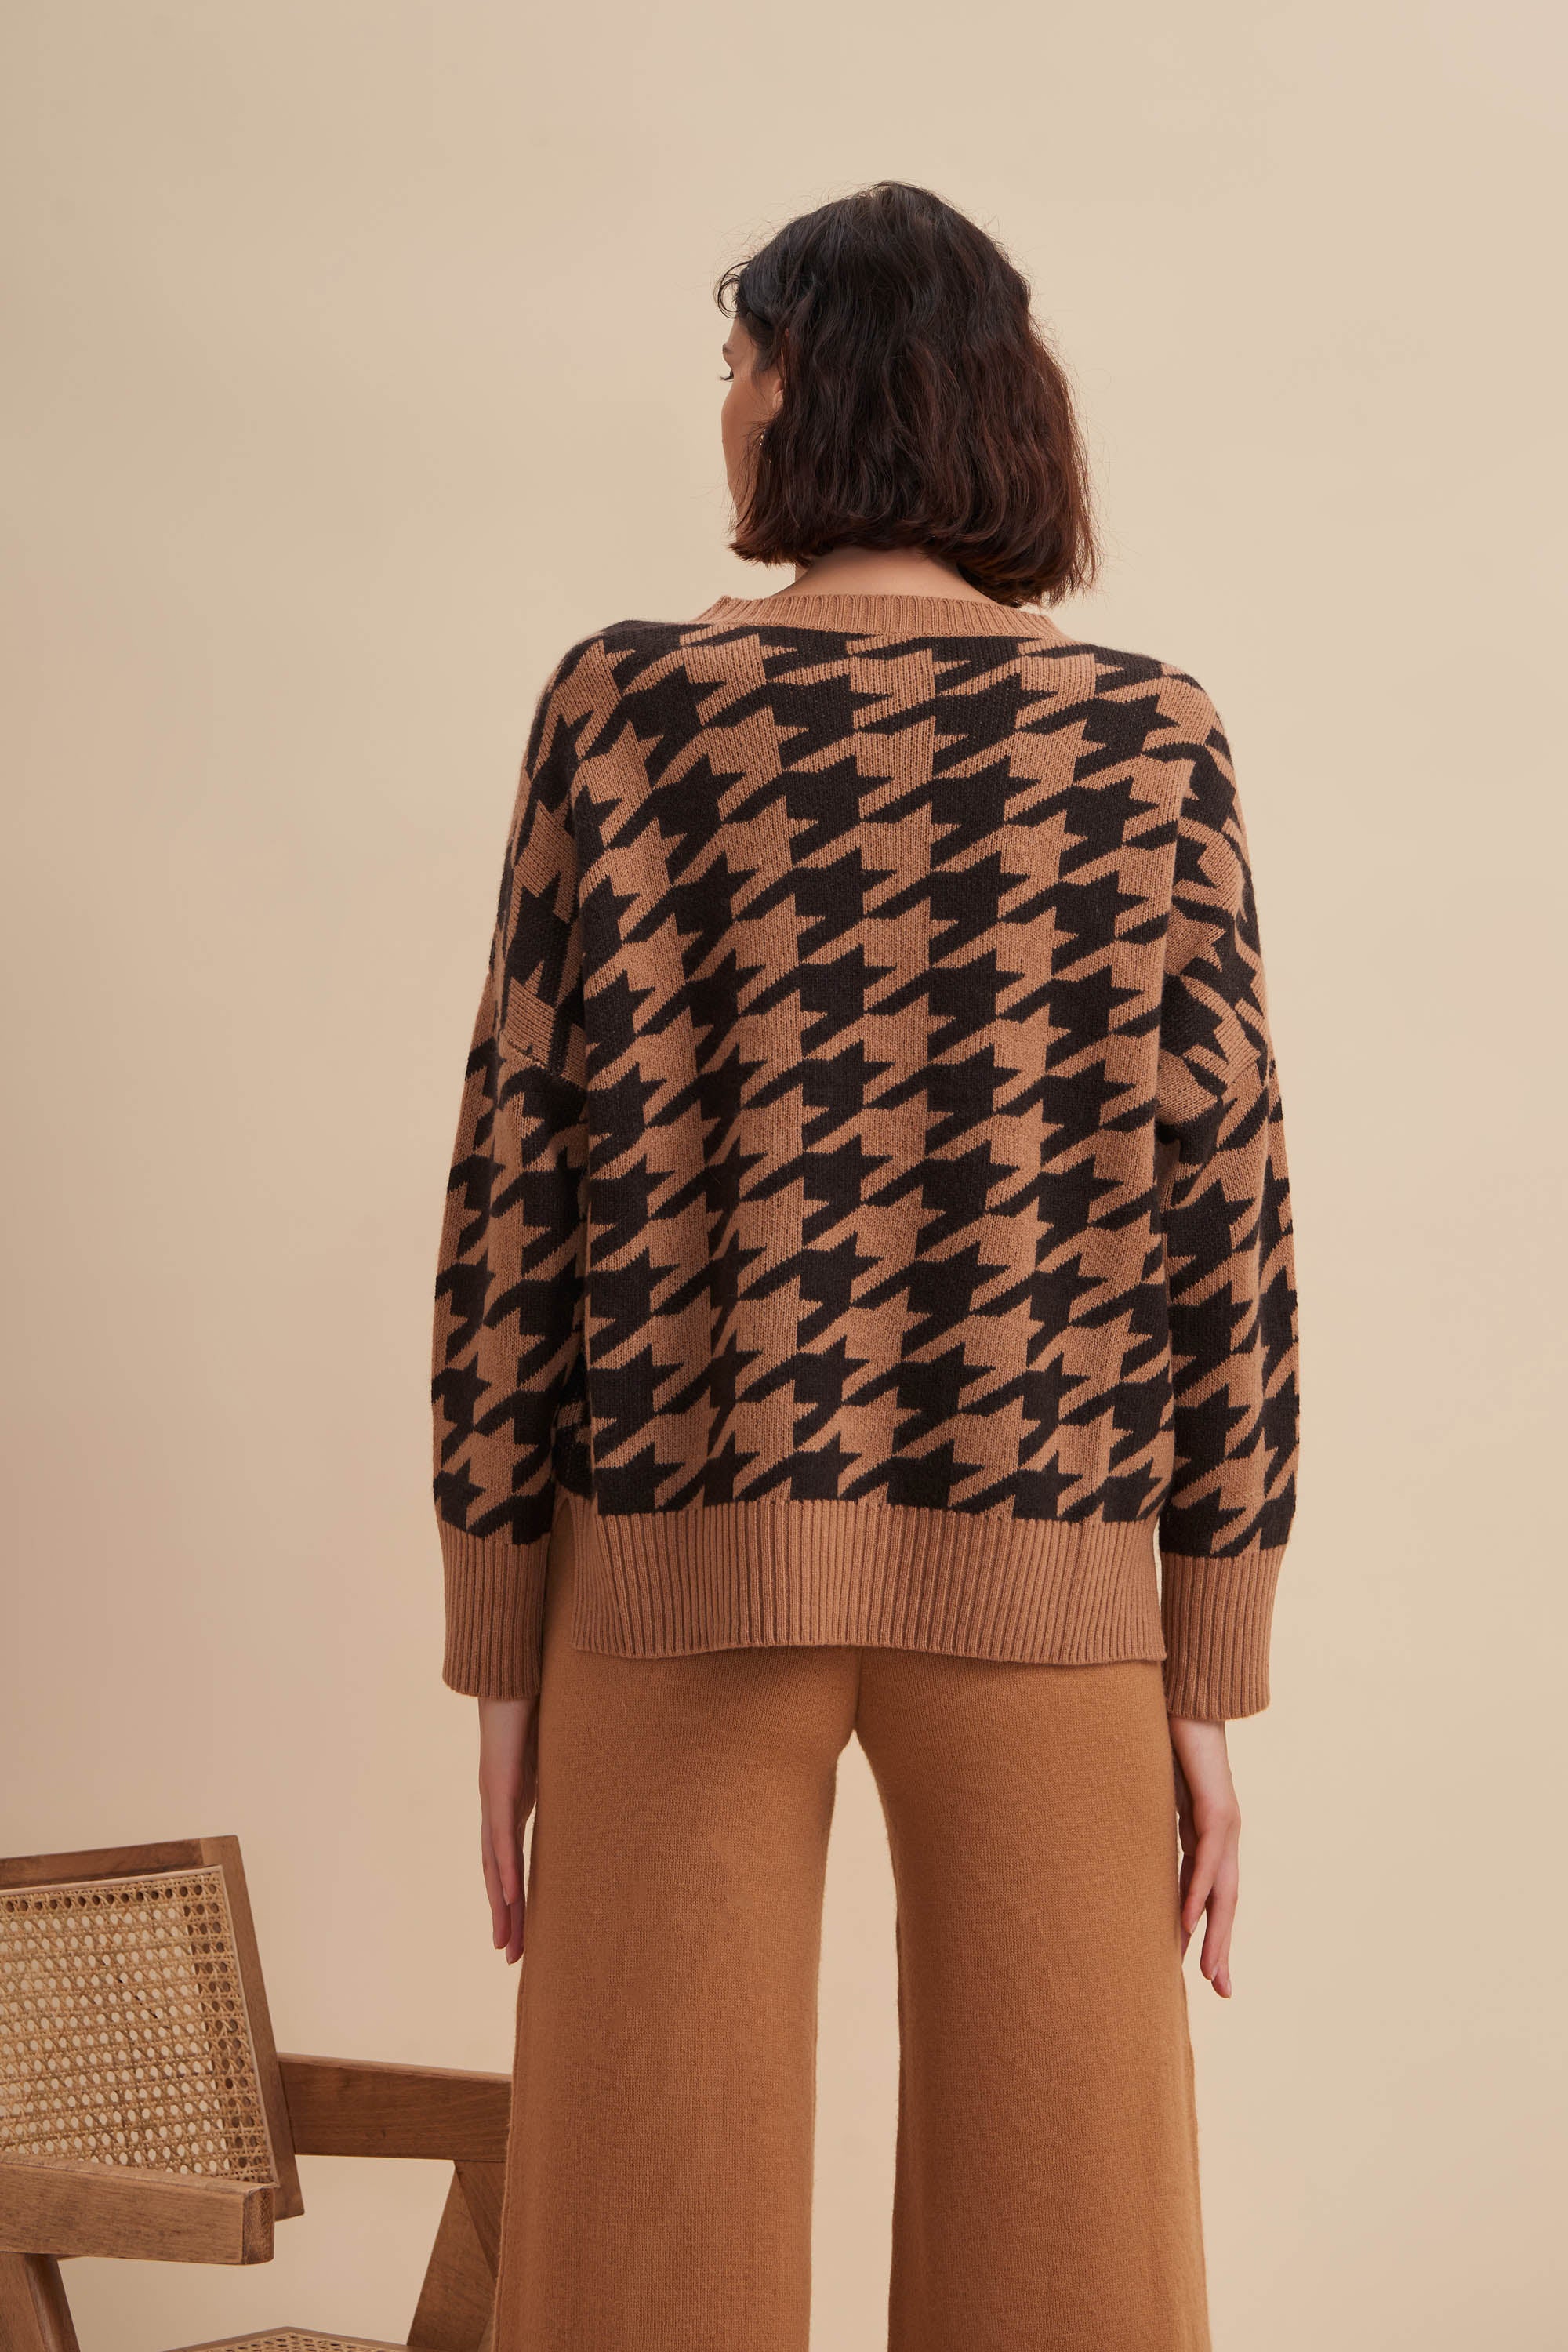 houndstooth sweater, camel cashmere sweater, camel sweater women, crew neck cashmere sweater, crew neck sweater womens, 70s sweater, retro sweater, vintage sweater